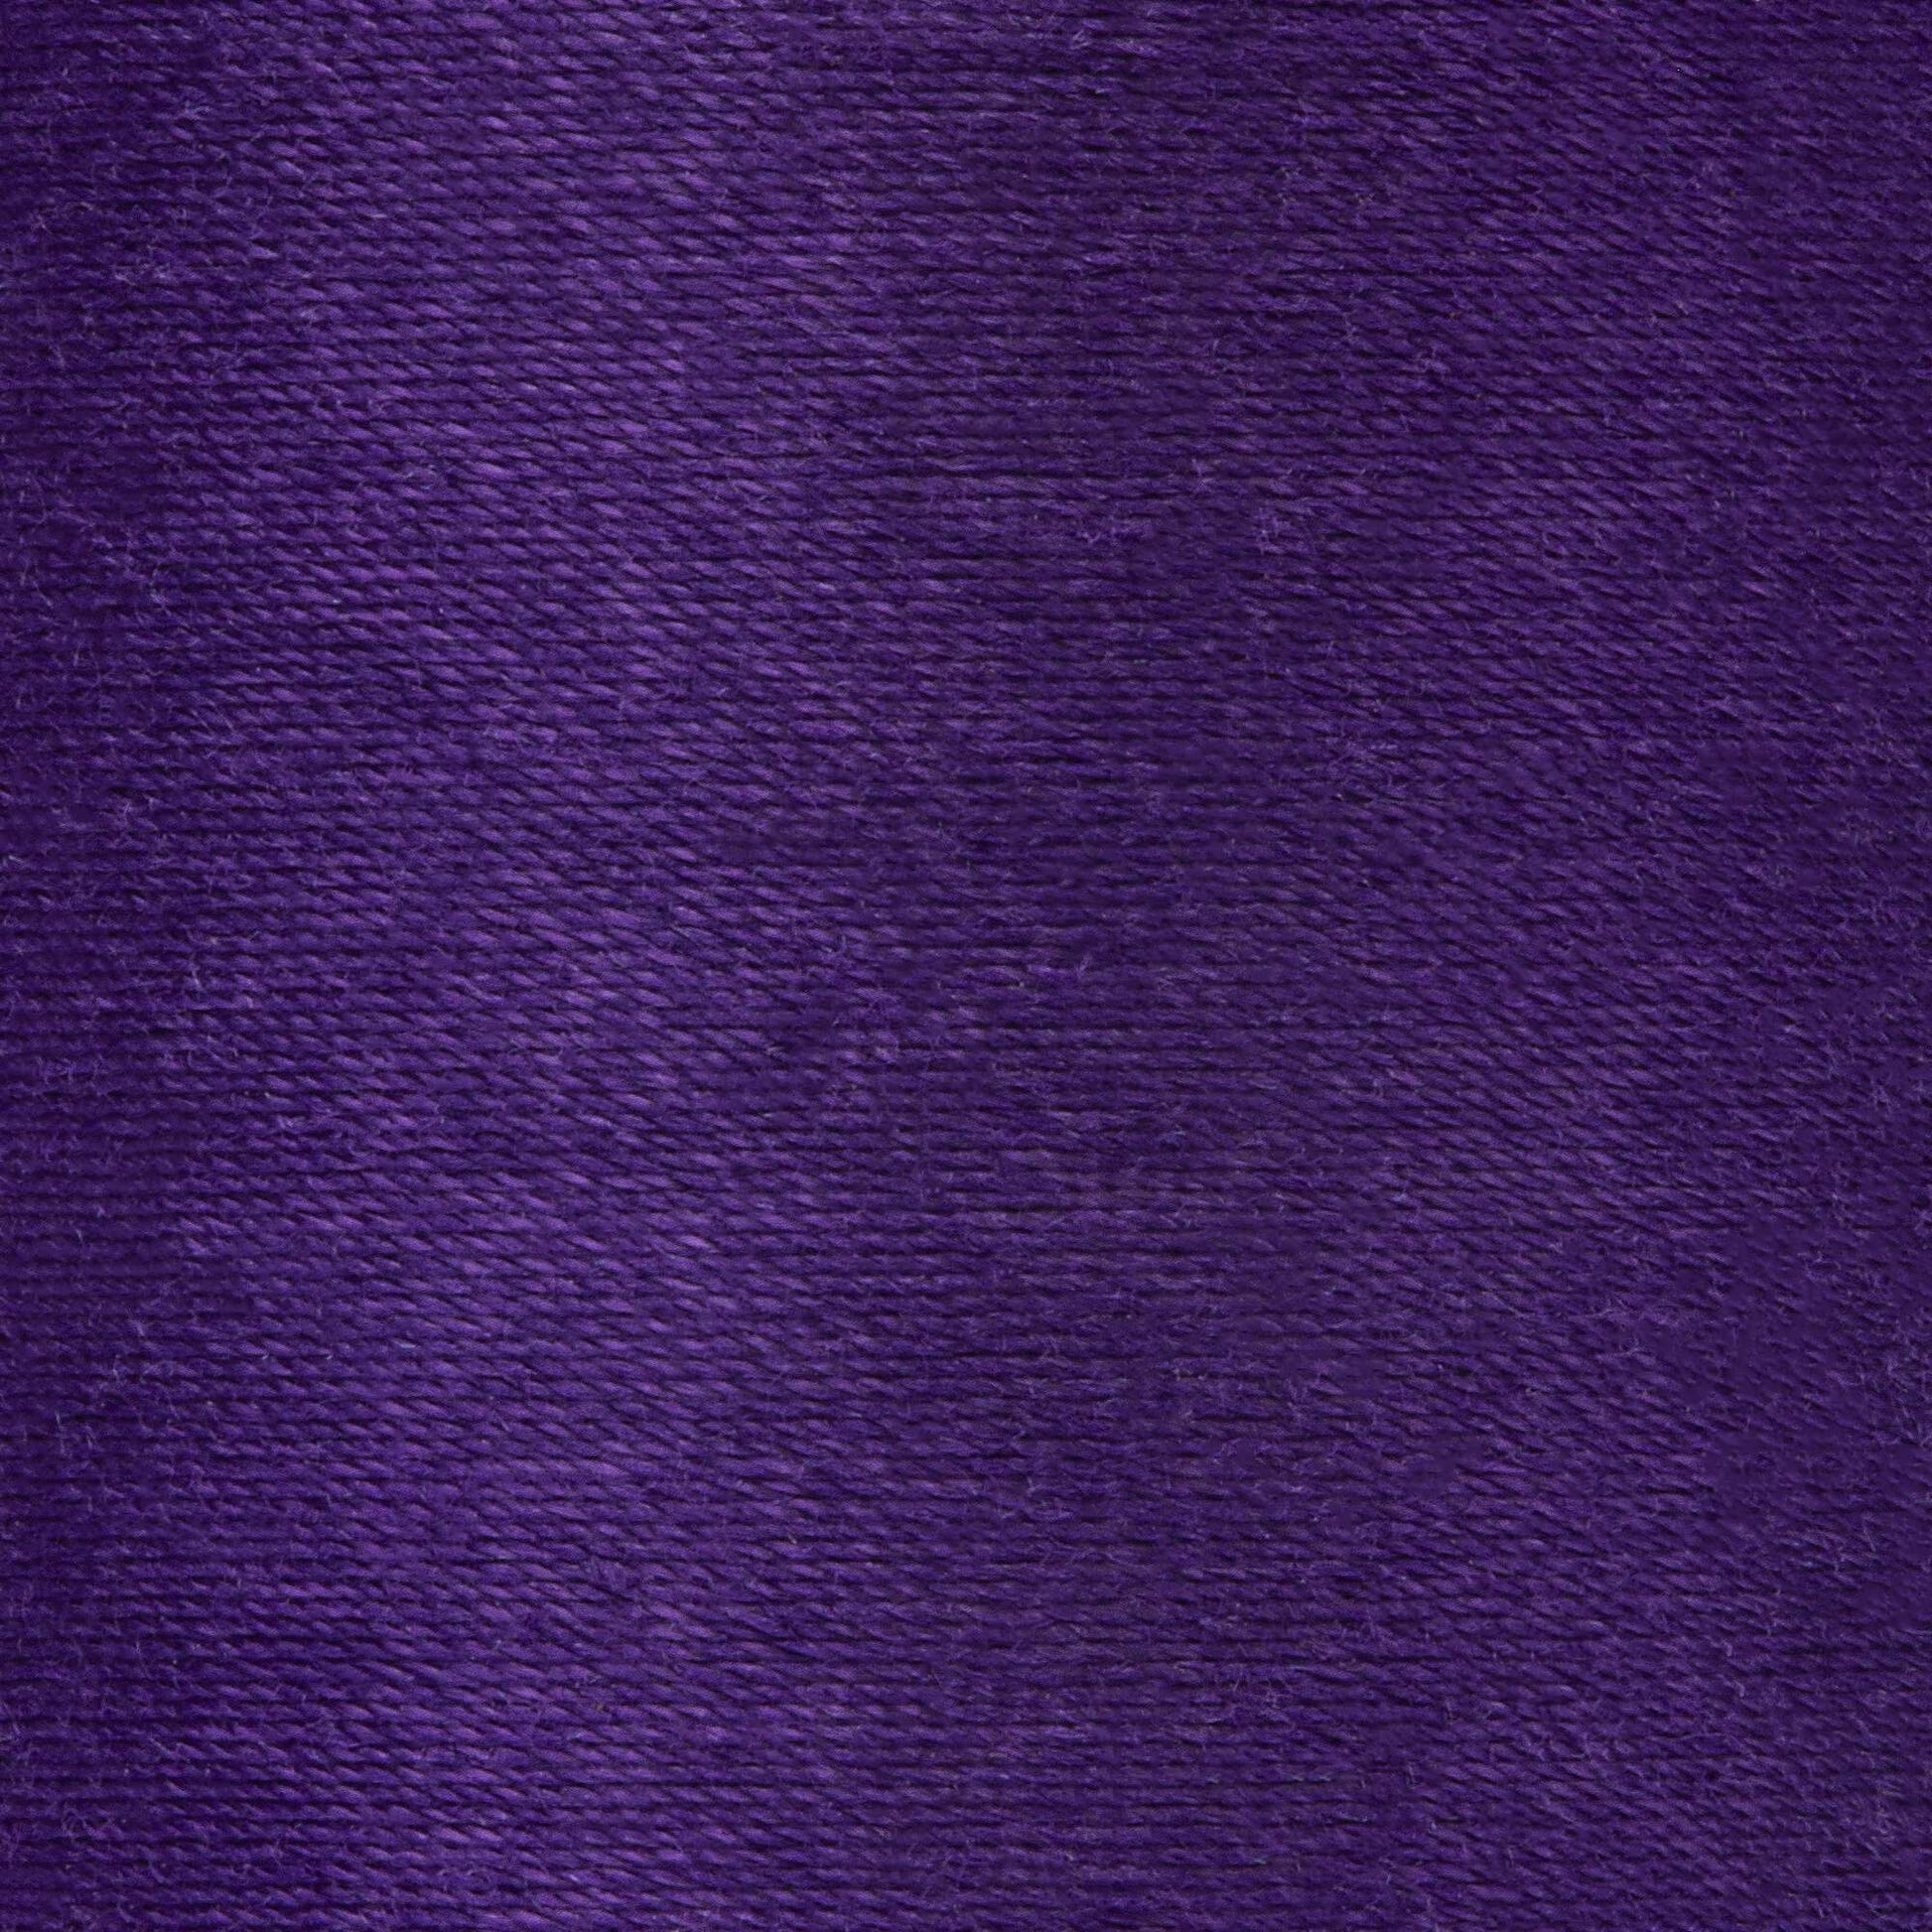 Coats & Clark Cotton Covered Quilting & Piecing Thread (250 Yards) Purple